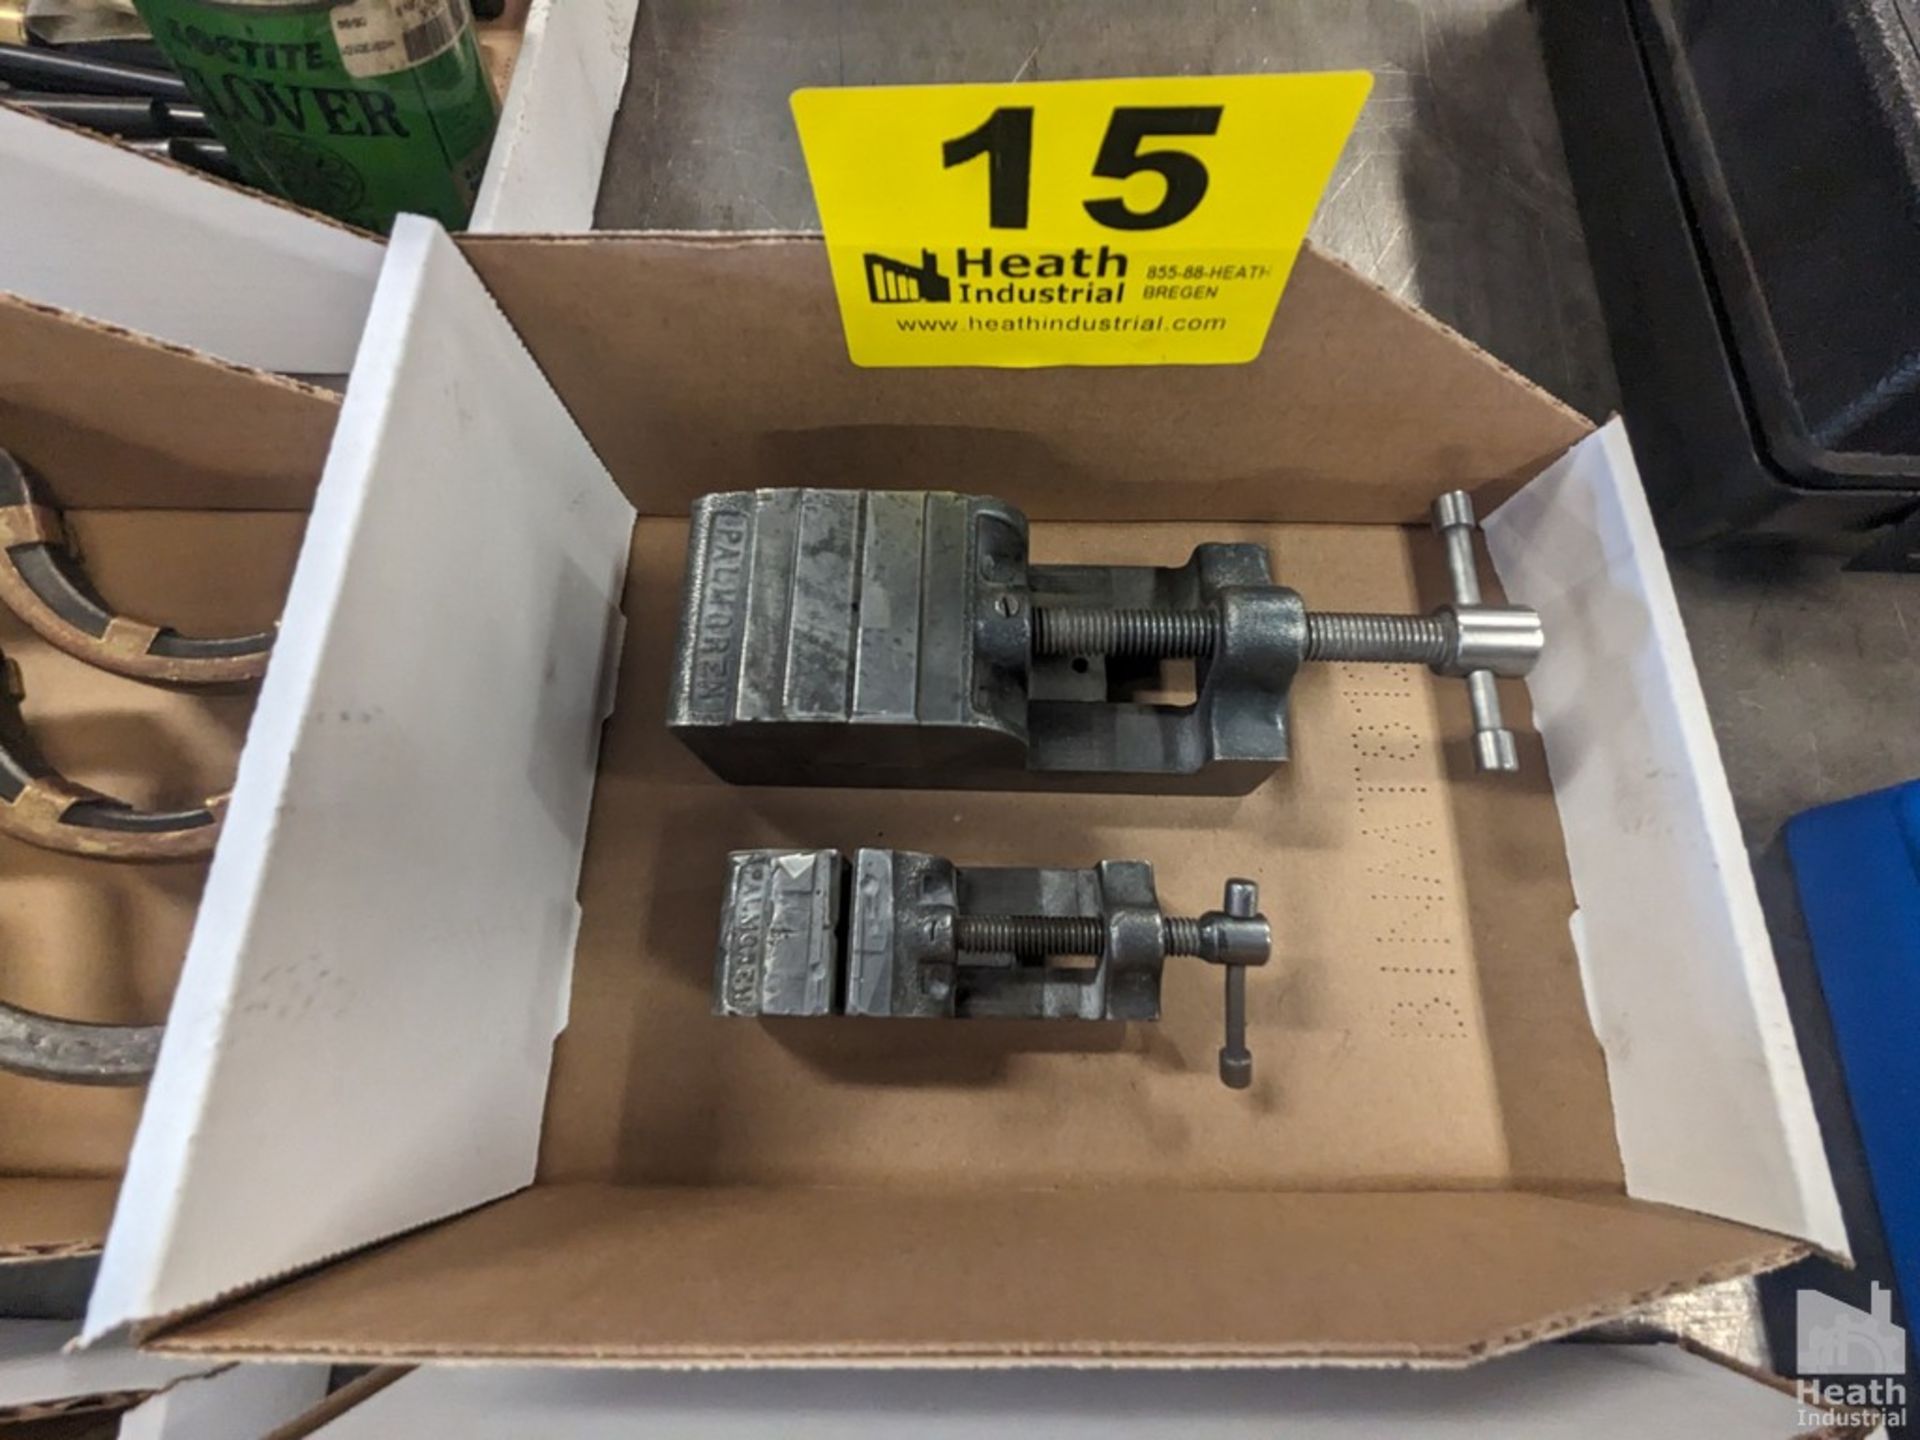 PALMGREN 2.5" VISE AND 1.5" VISE IN BOX